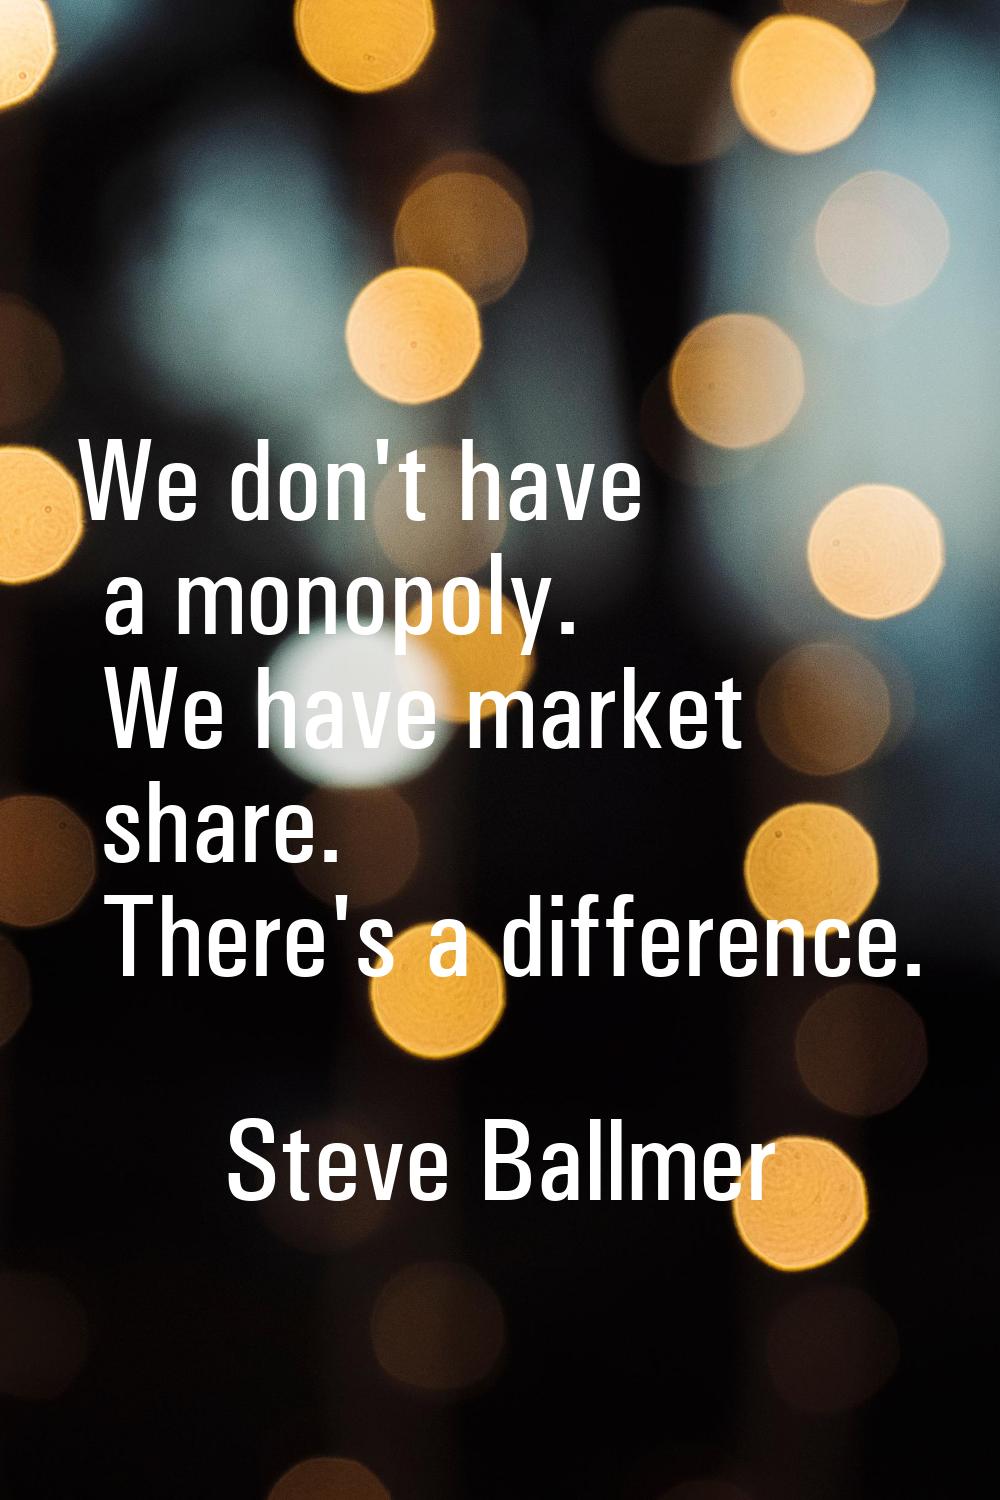 We don't have a monopoly. We have market share. There's a difference.